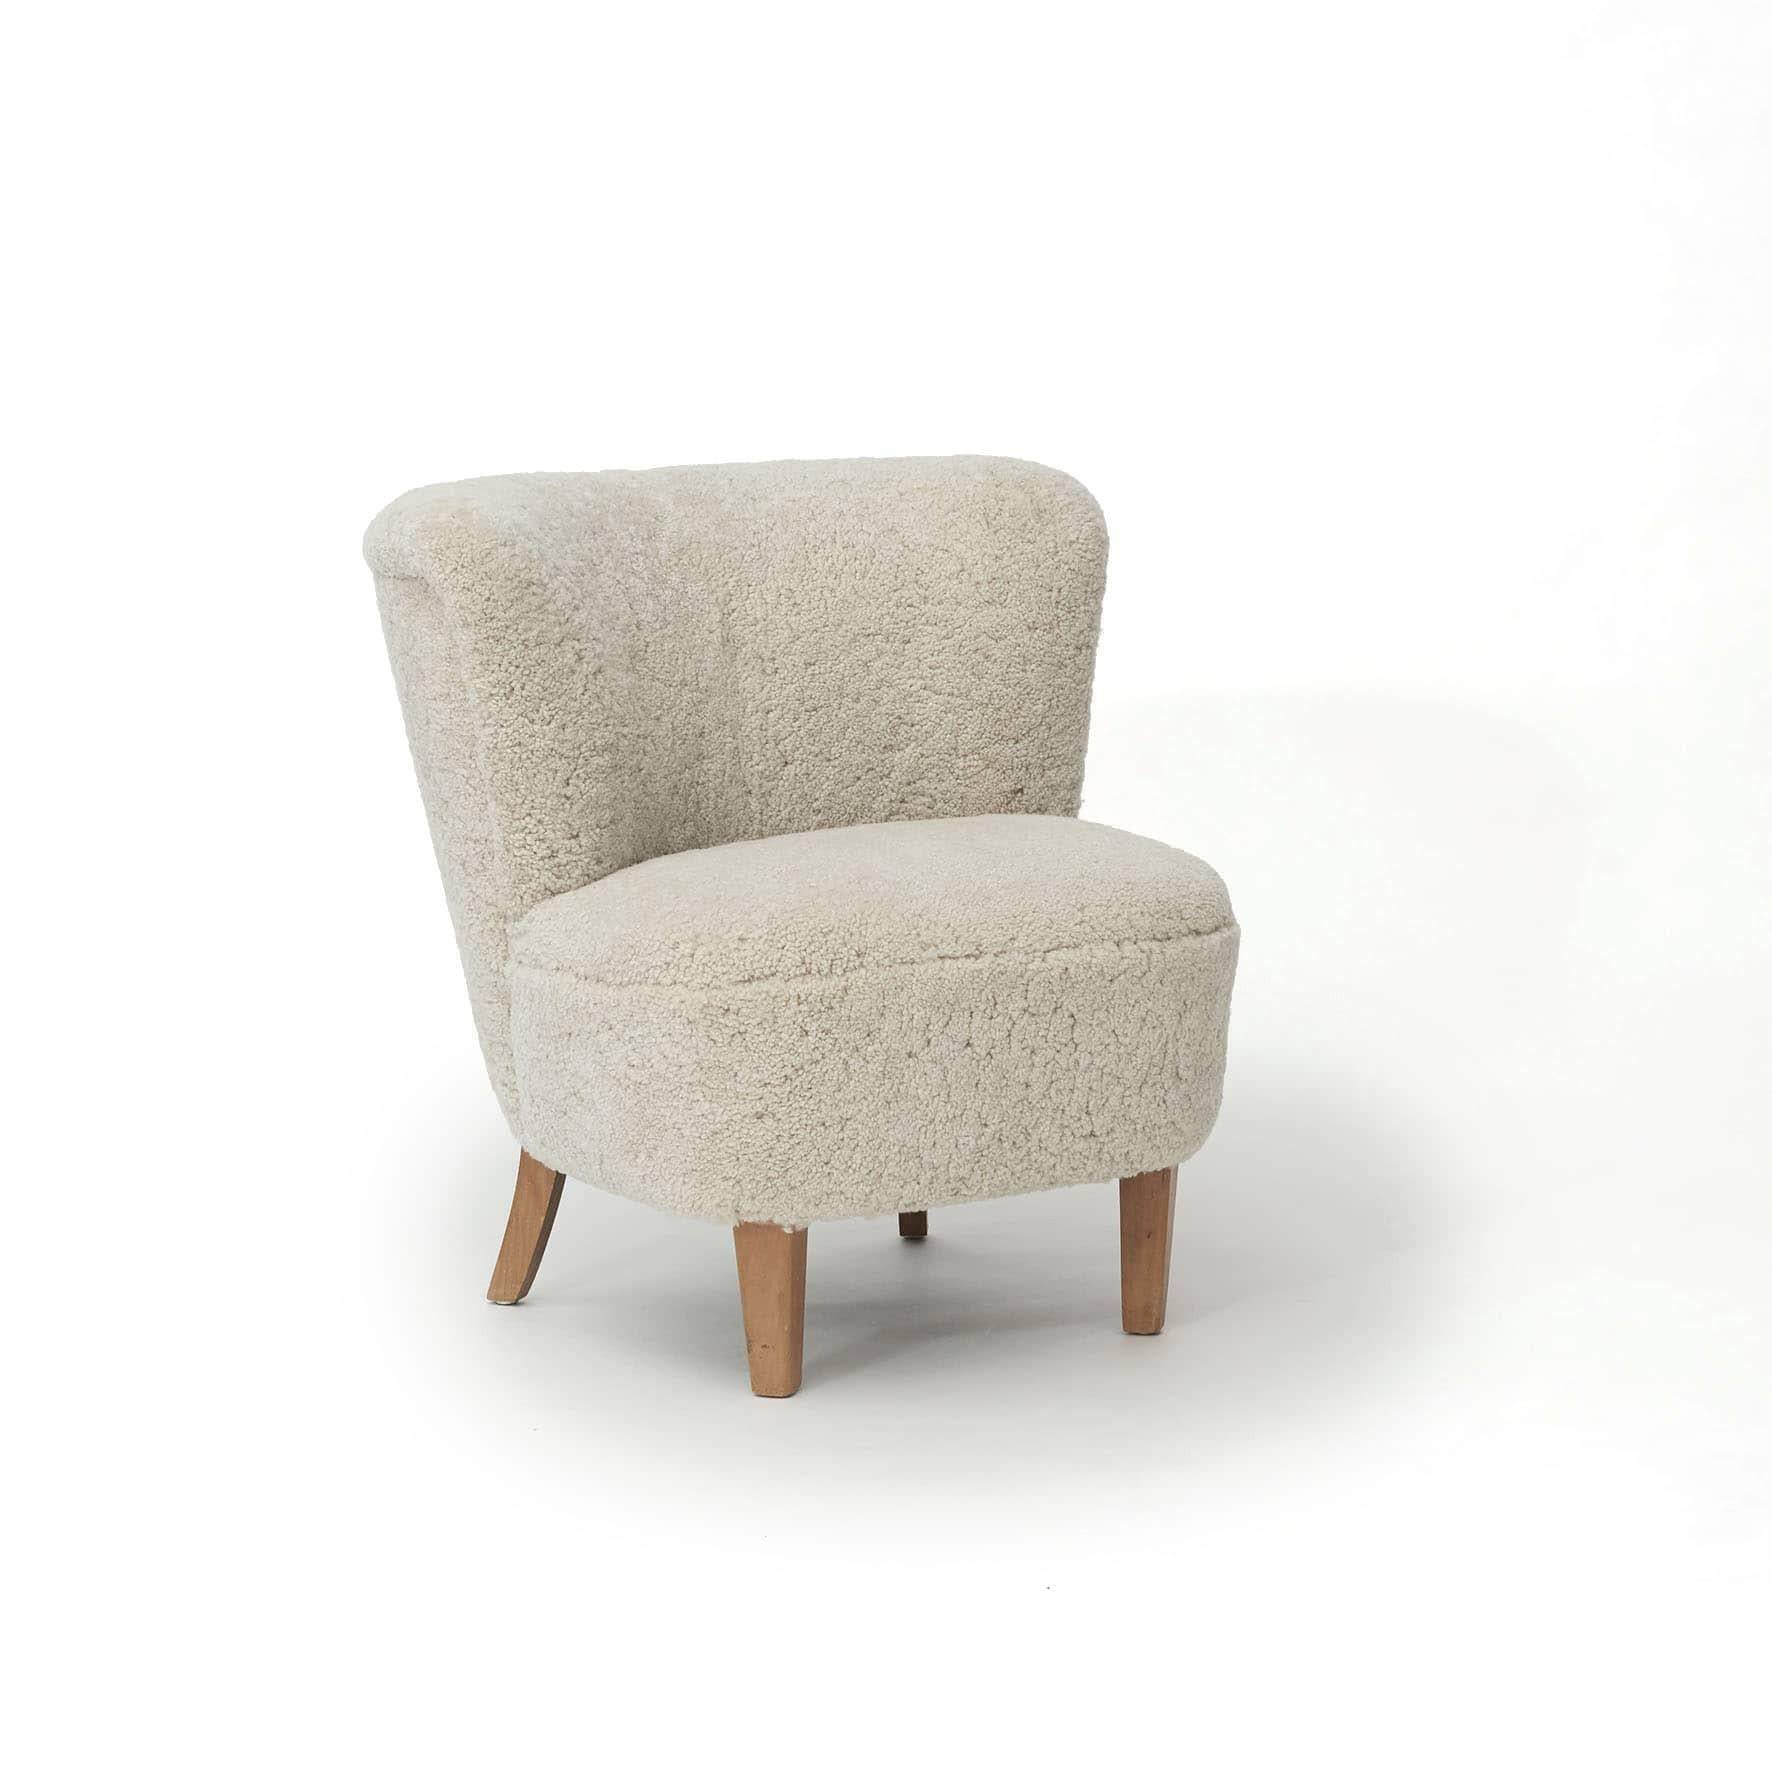 By lounge chairs. Danish design and cabinetmaker, 1940-1950.
Newly upholstered in lambskin in very fine quality.
Grate seating comfort.
Sold as a pair for € 11.050.